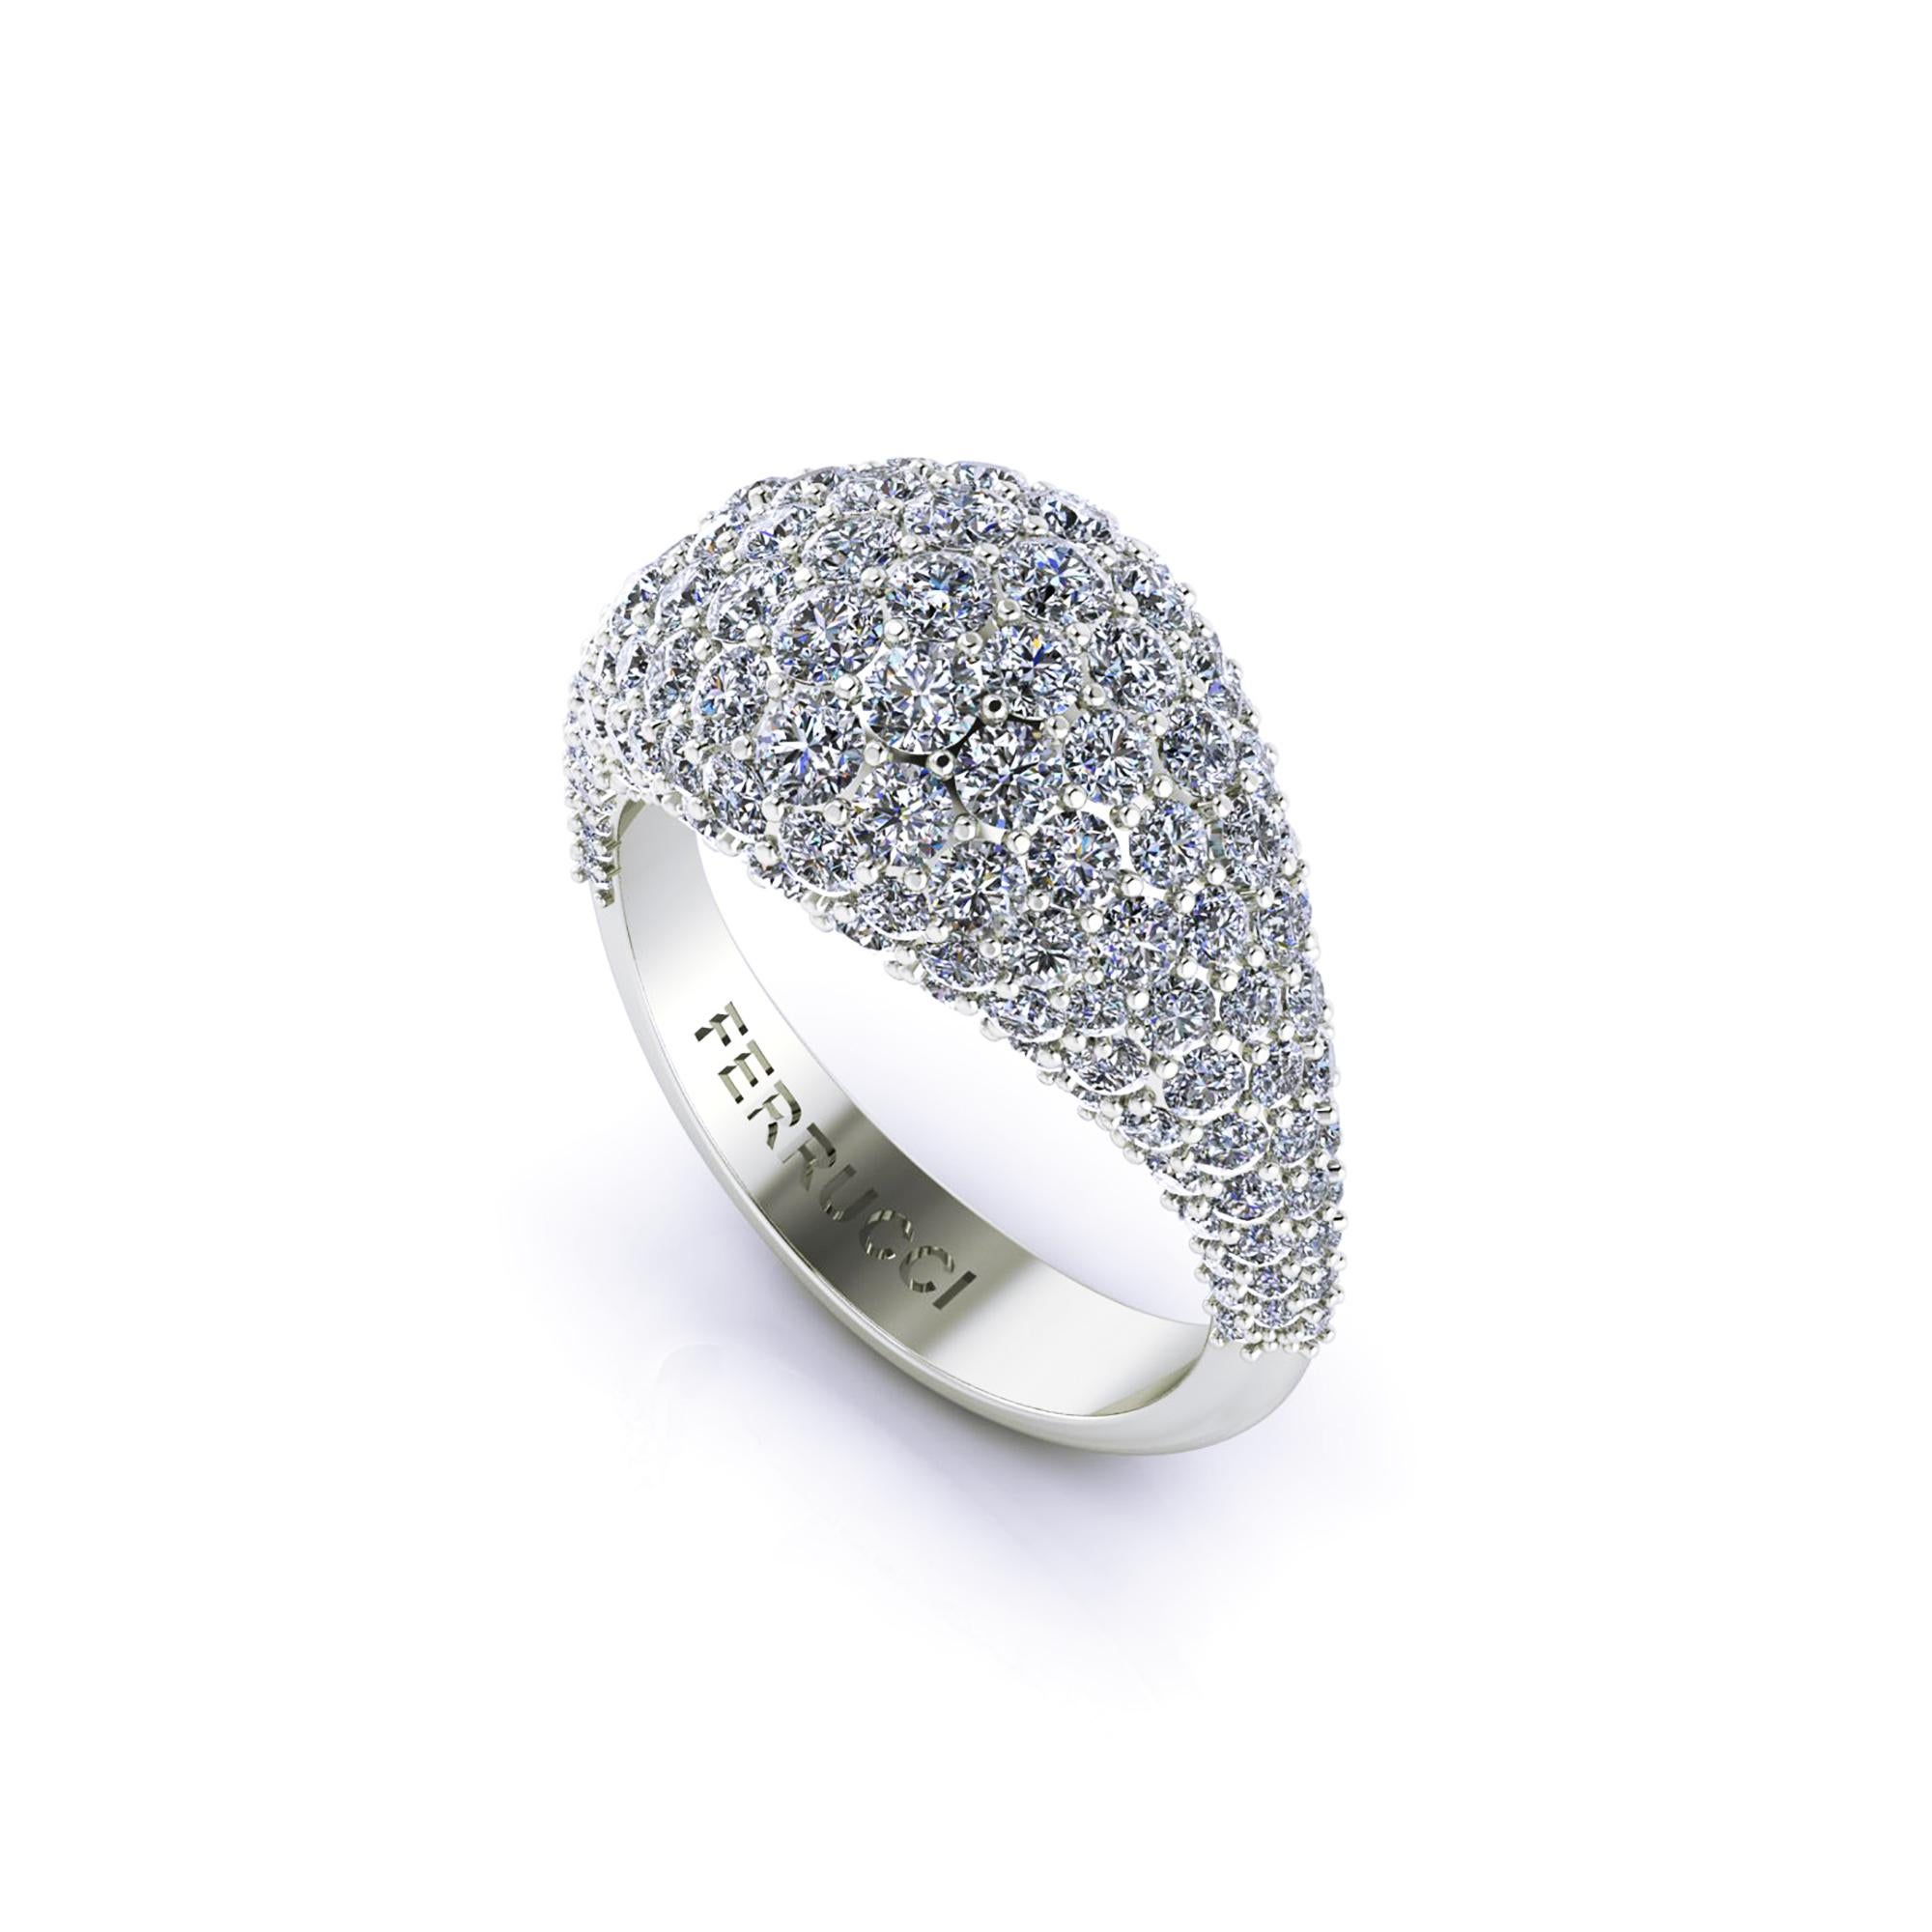 Dome, white bright diamonds, organic ring, a wrap of sparkling, intense, bright white diamonds, F/G color, VS clarity, for an approximate diamond's total carat weight of 2.50 carats, hand made in New York City with the best Italian craftsmanship,